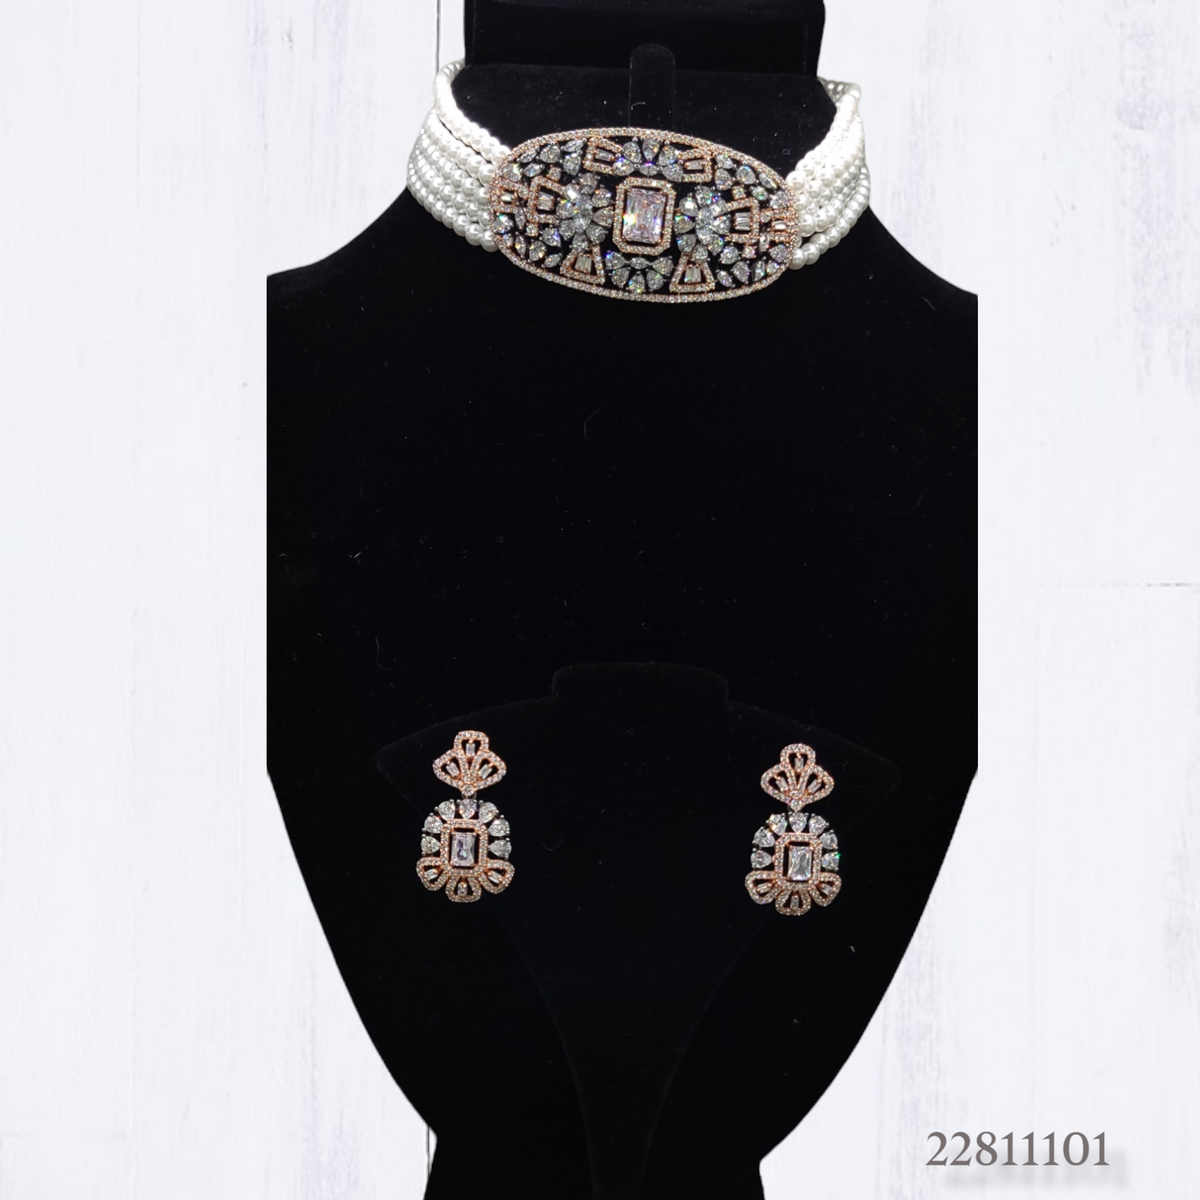 PEARLS AND DIAMONDS CHOKER STYLE NECKLACE SET WITH EARRINGS